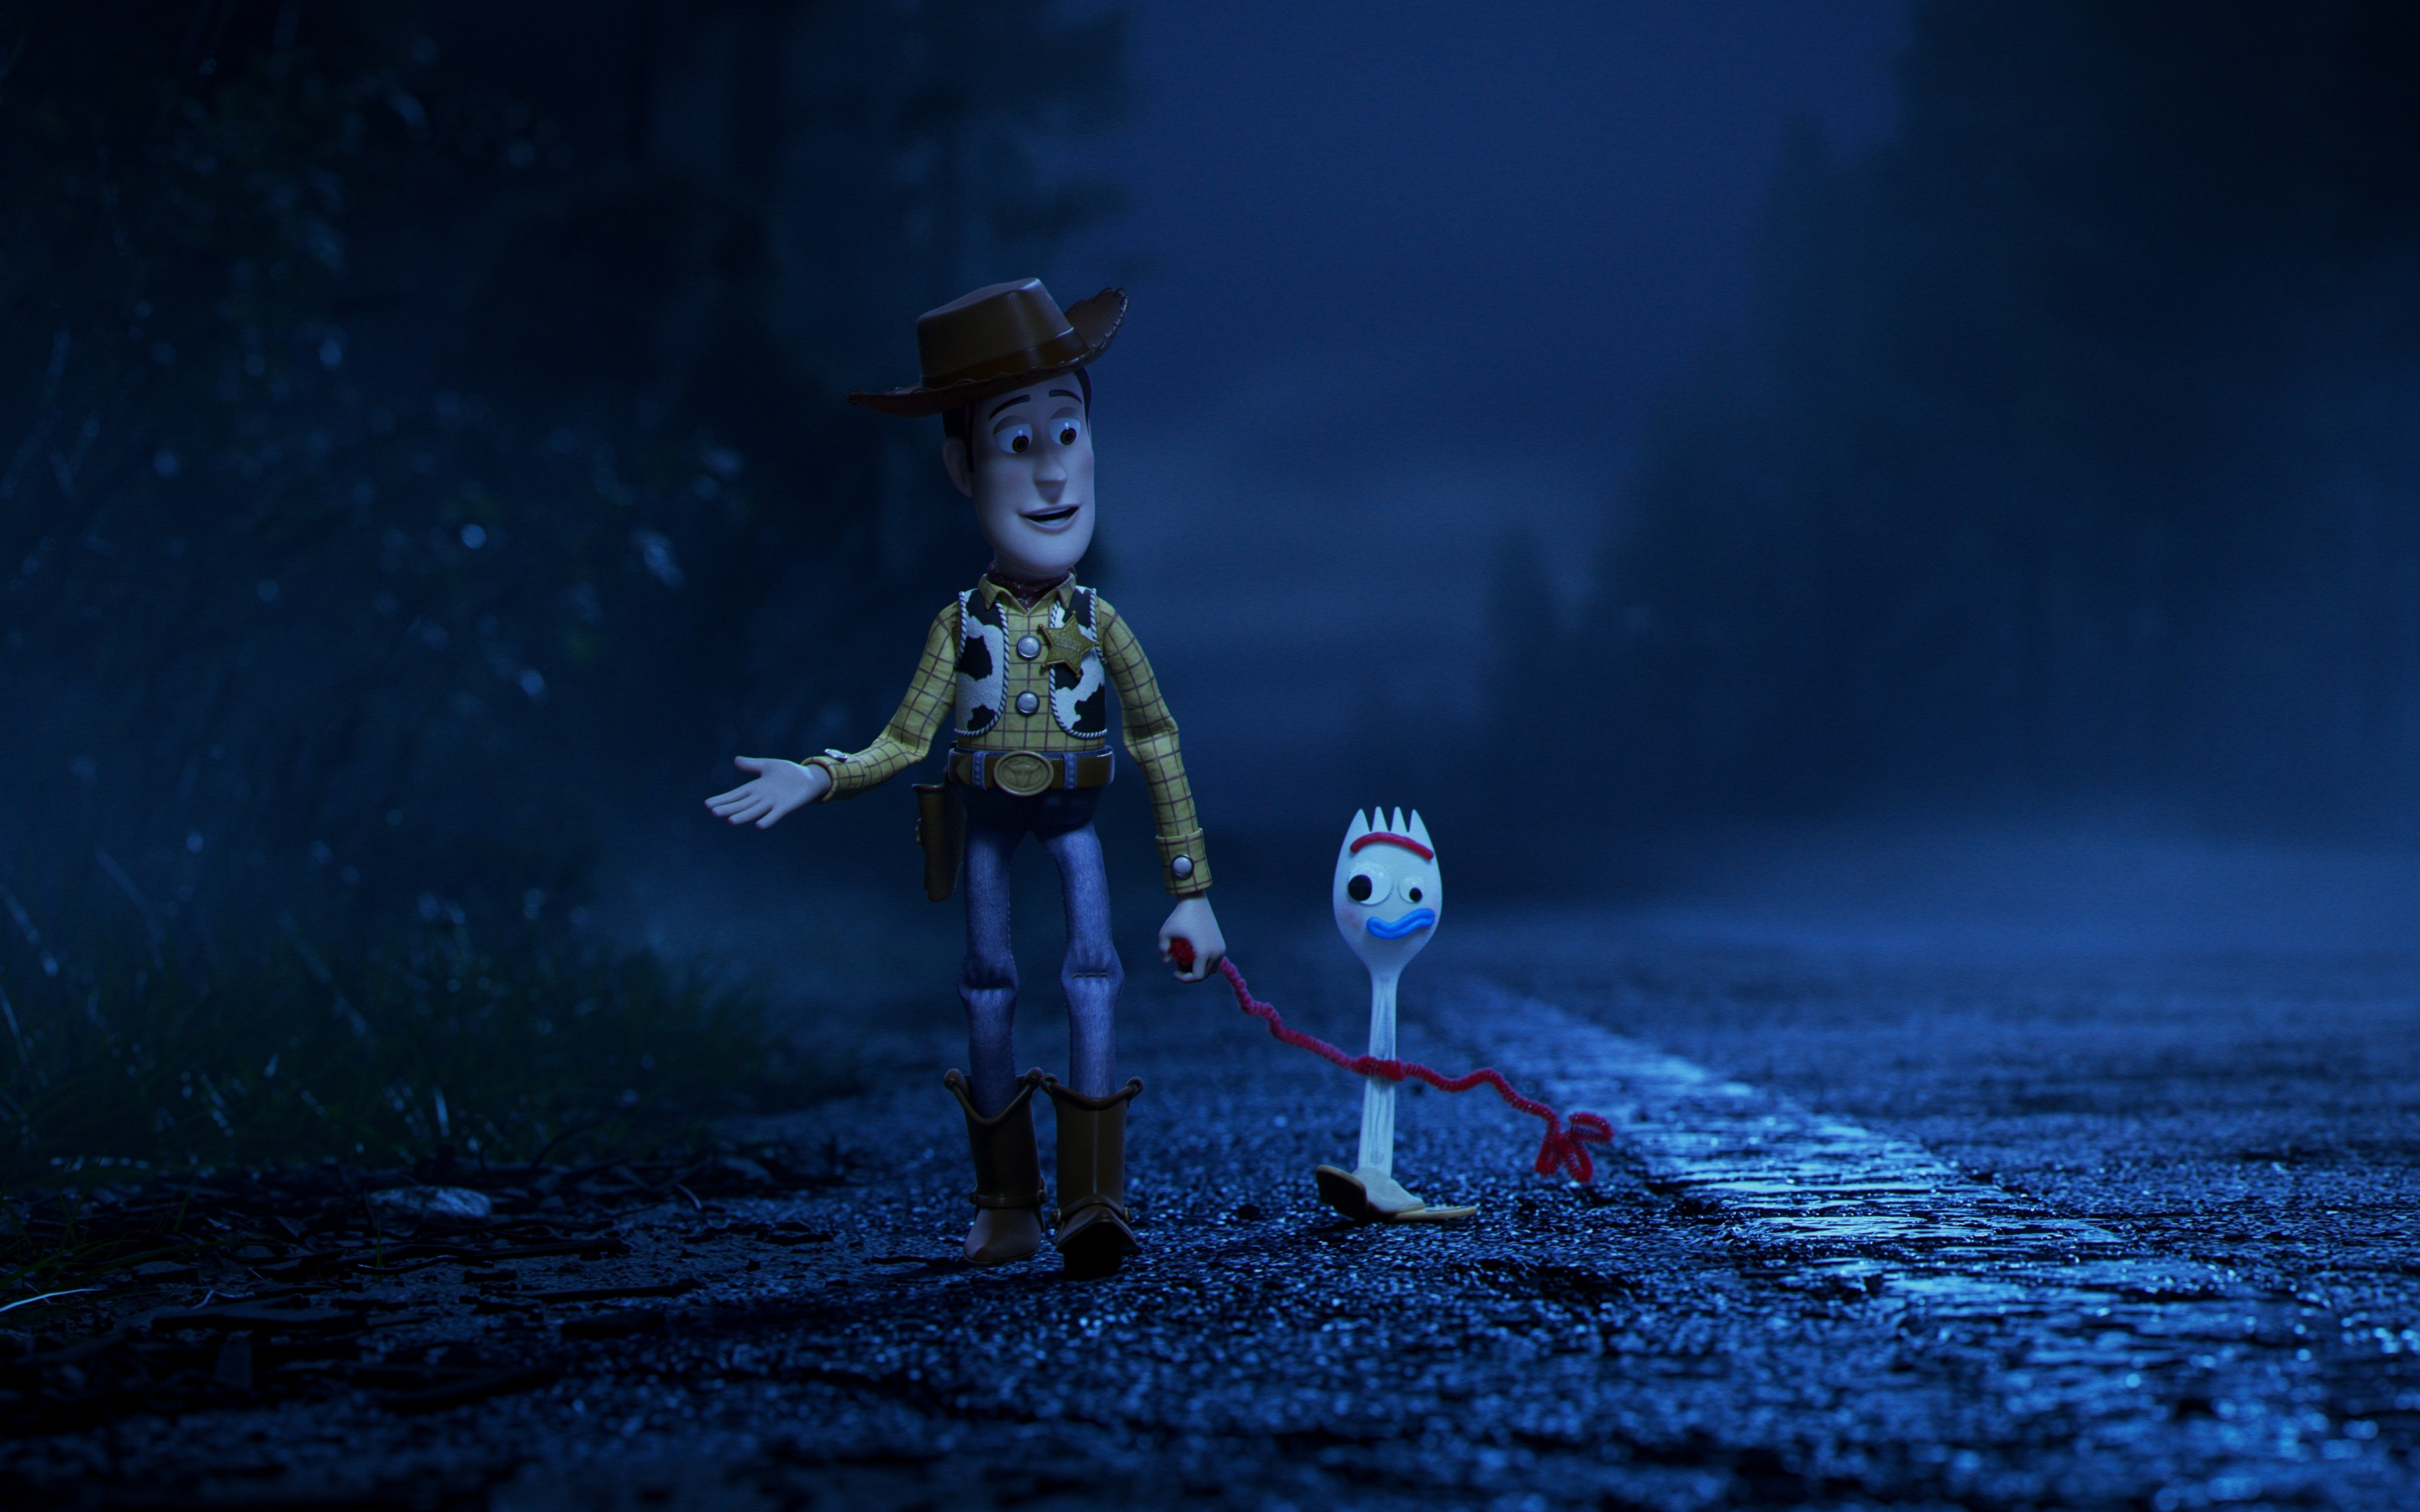 2019 movie, Toy Story 4, night out, walk, 2880x1800 wallpaper